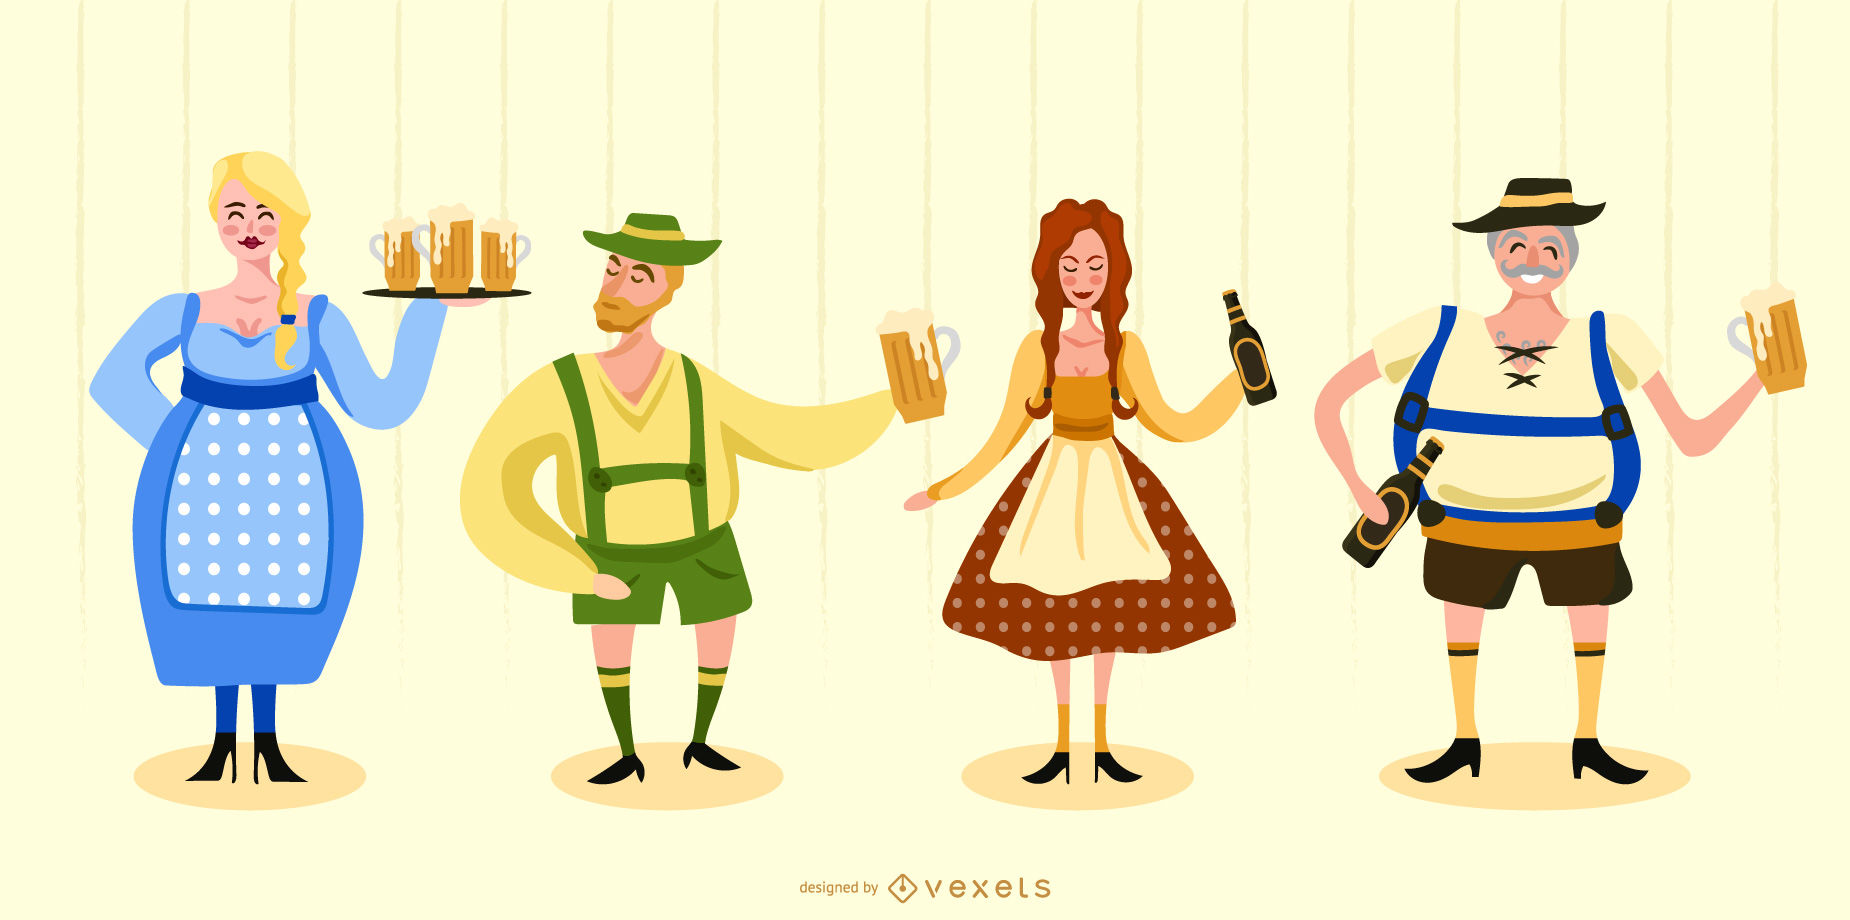 Oktoberfest clipart tradition. Traditional characters set vector